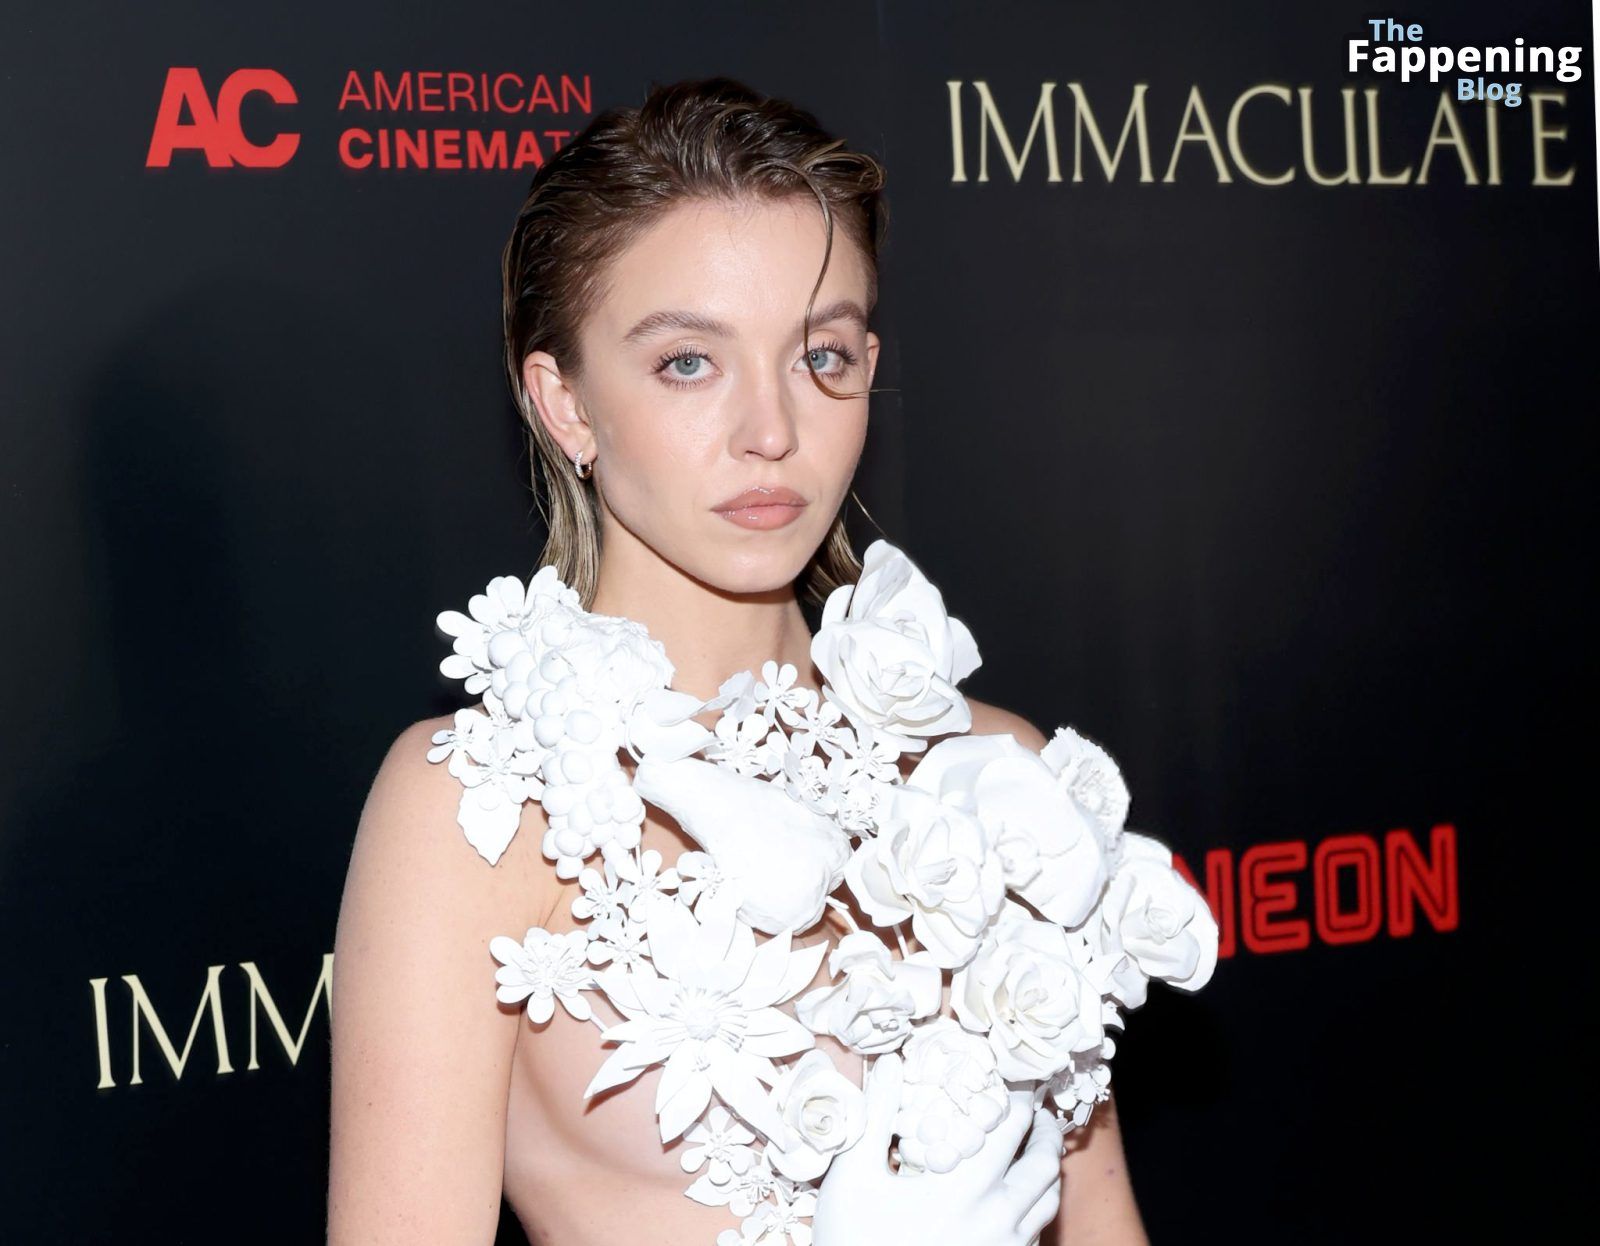 Sydney-Sweeney-Immaculate-Premiere-Glamorous-Outfit-Breasts-16-thefappeningblog.com_.jpg